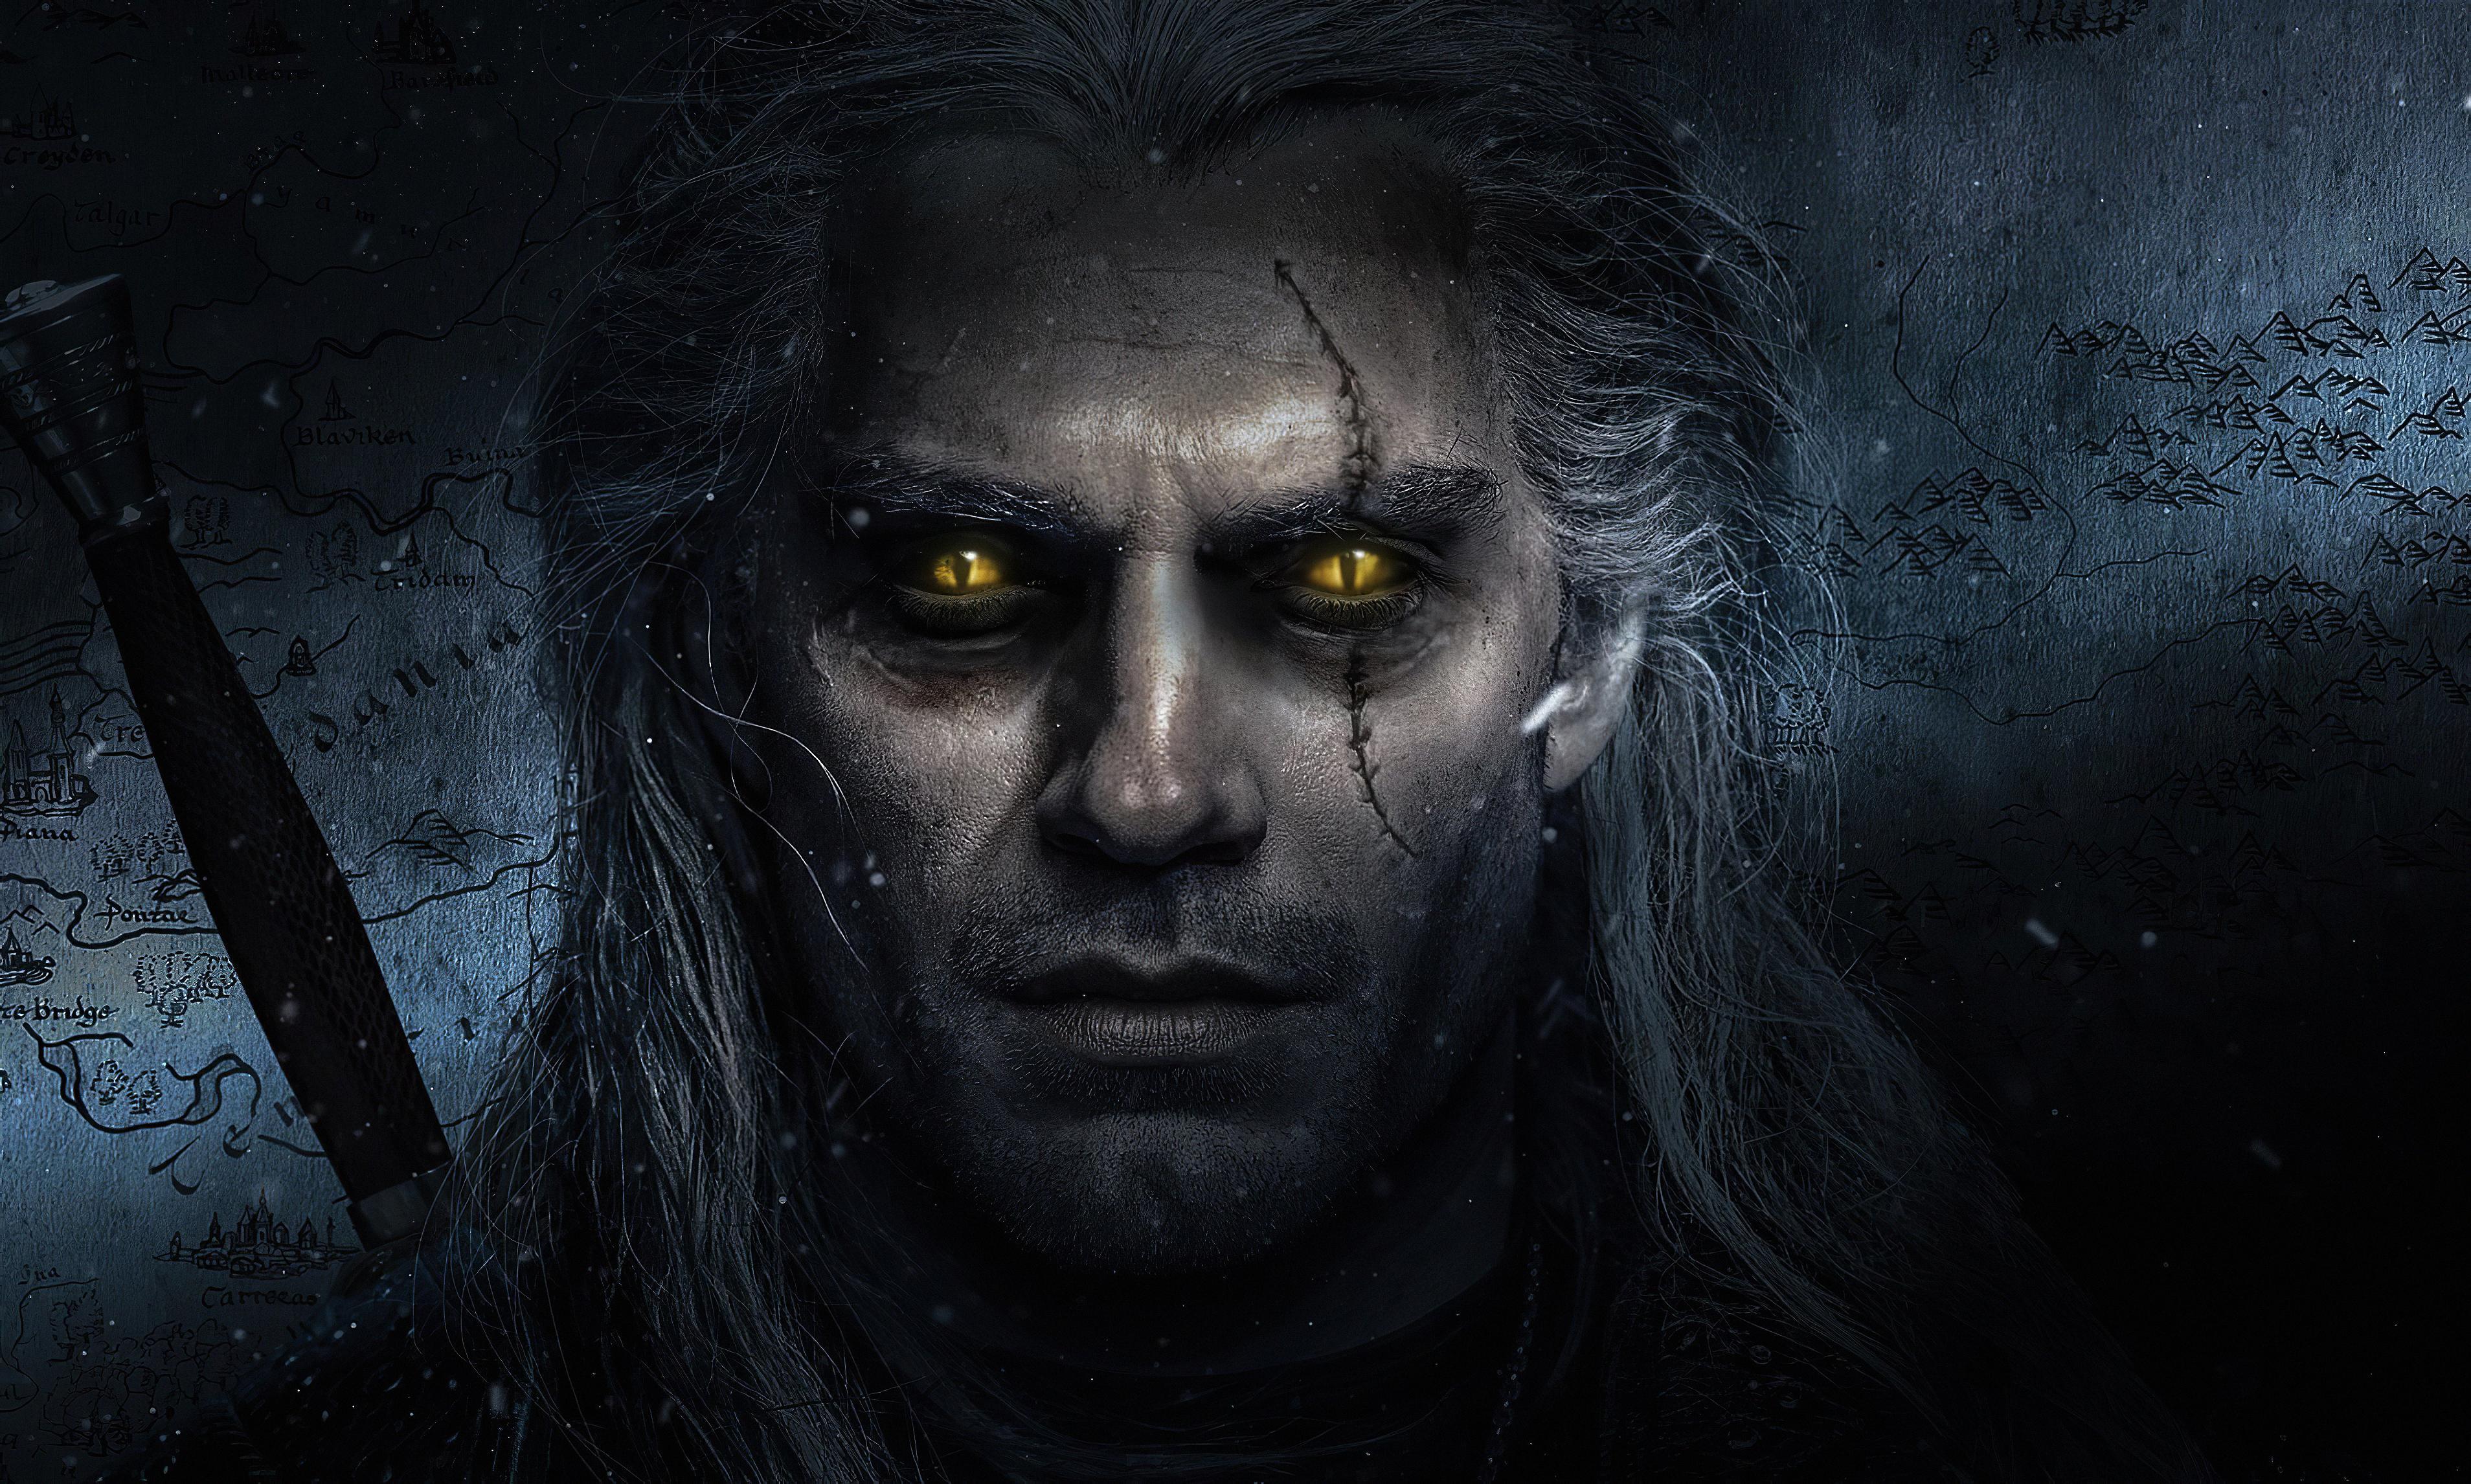 3816 x 2292 · jpeg - The Witcher TV Series Wallpapers - Wallpaper Cave